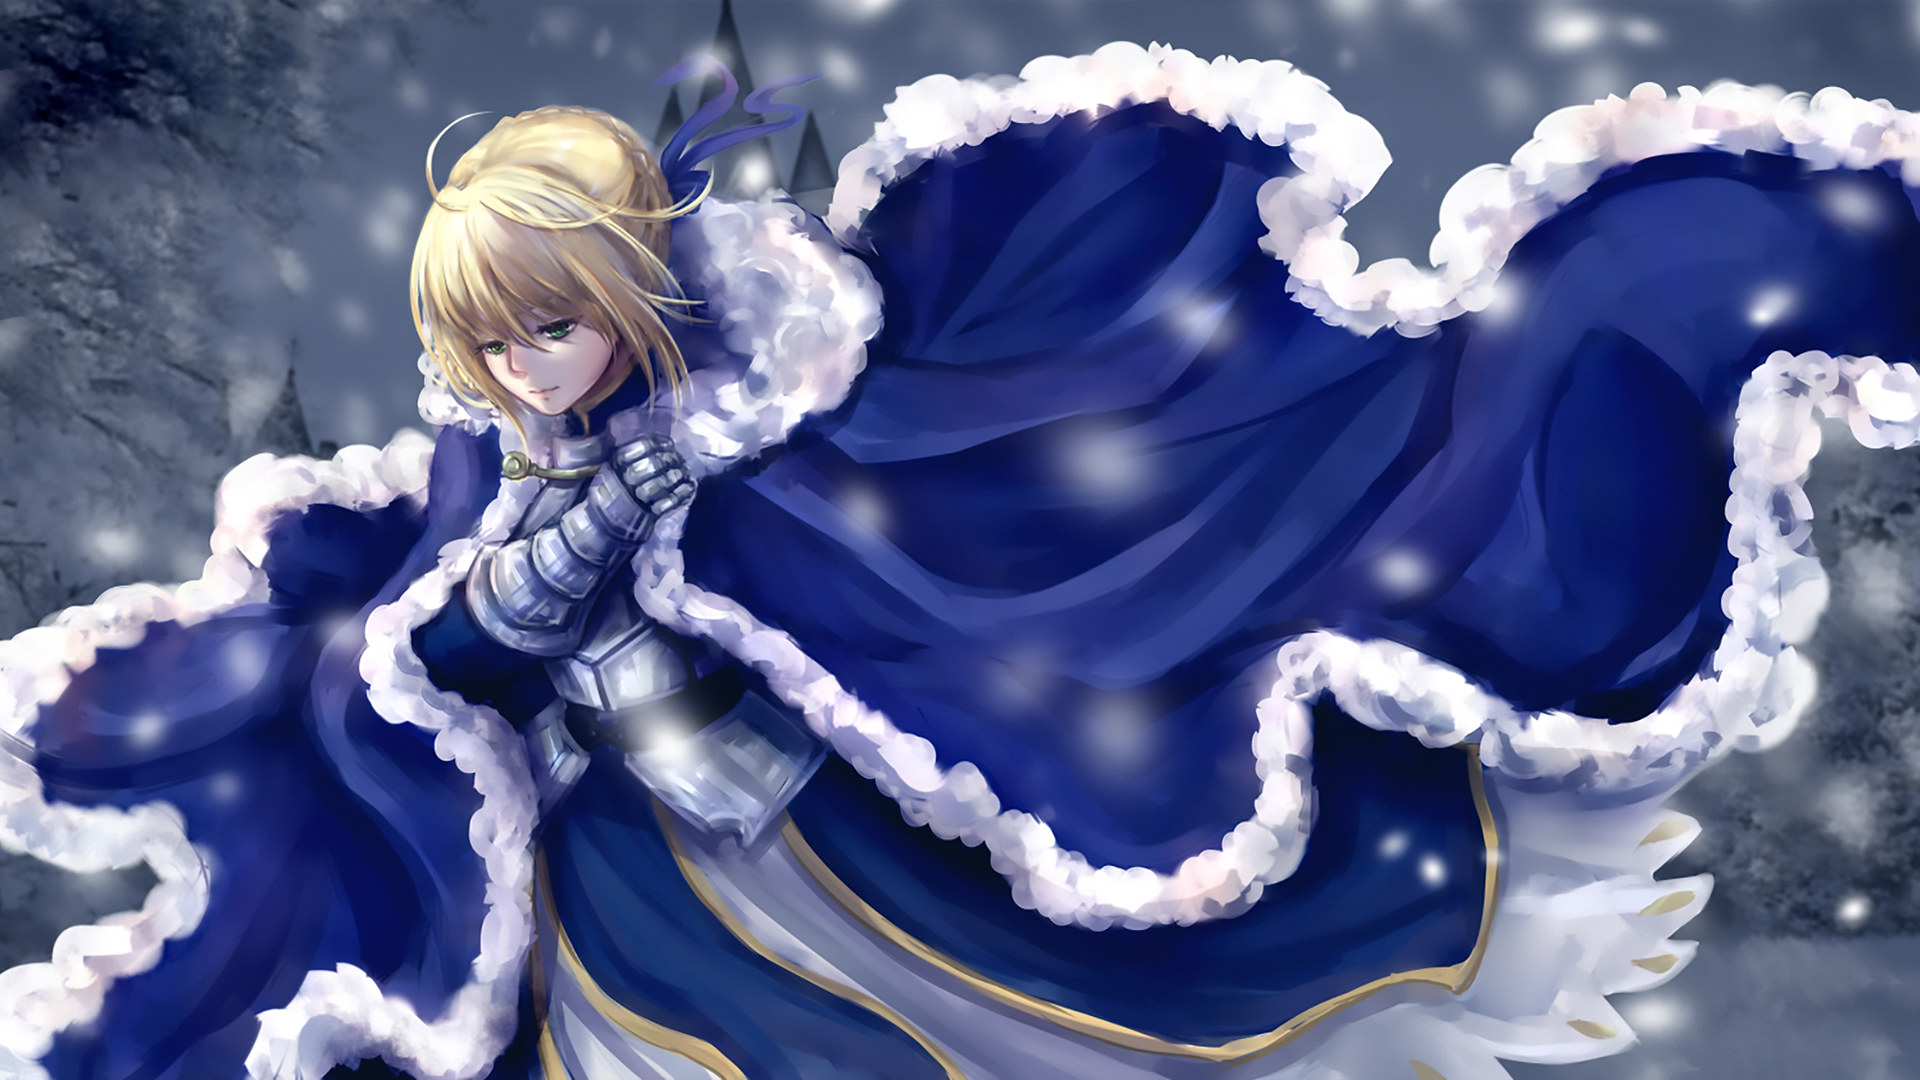 Anime Fate/Stay Night HD Wallpaper by VV丶SAMA